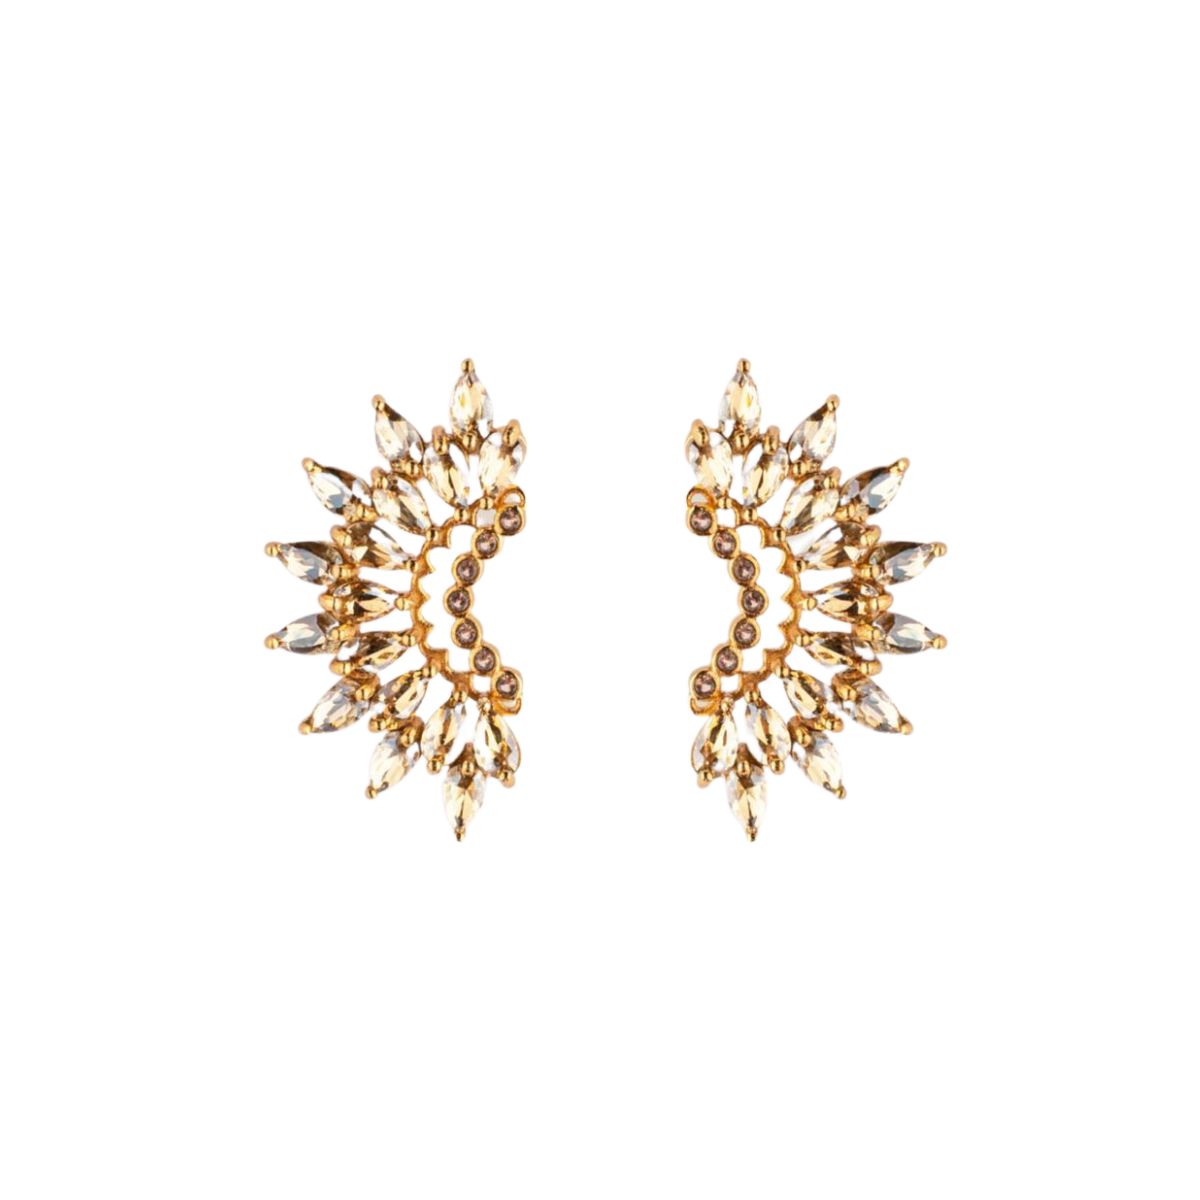 Mignonne Gavigan Crystal Madeline Crescent Earring in Champagne Crystal